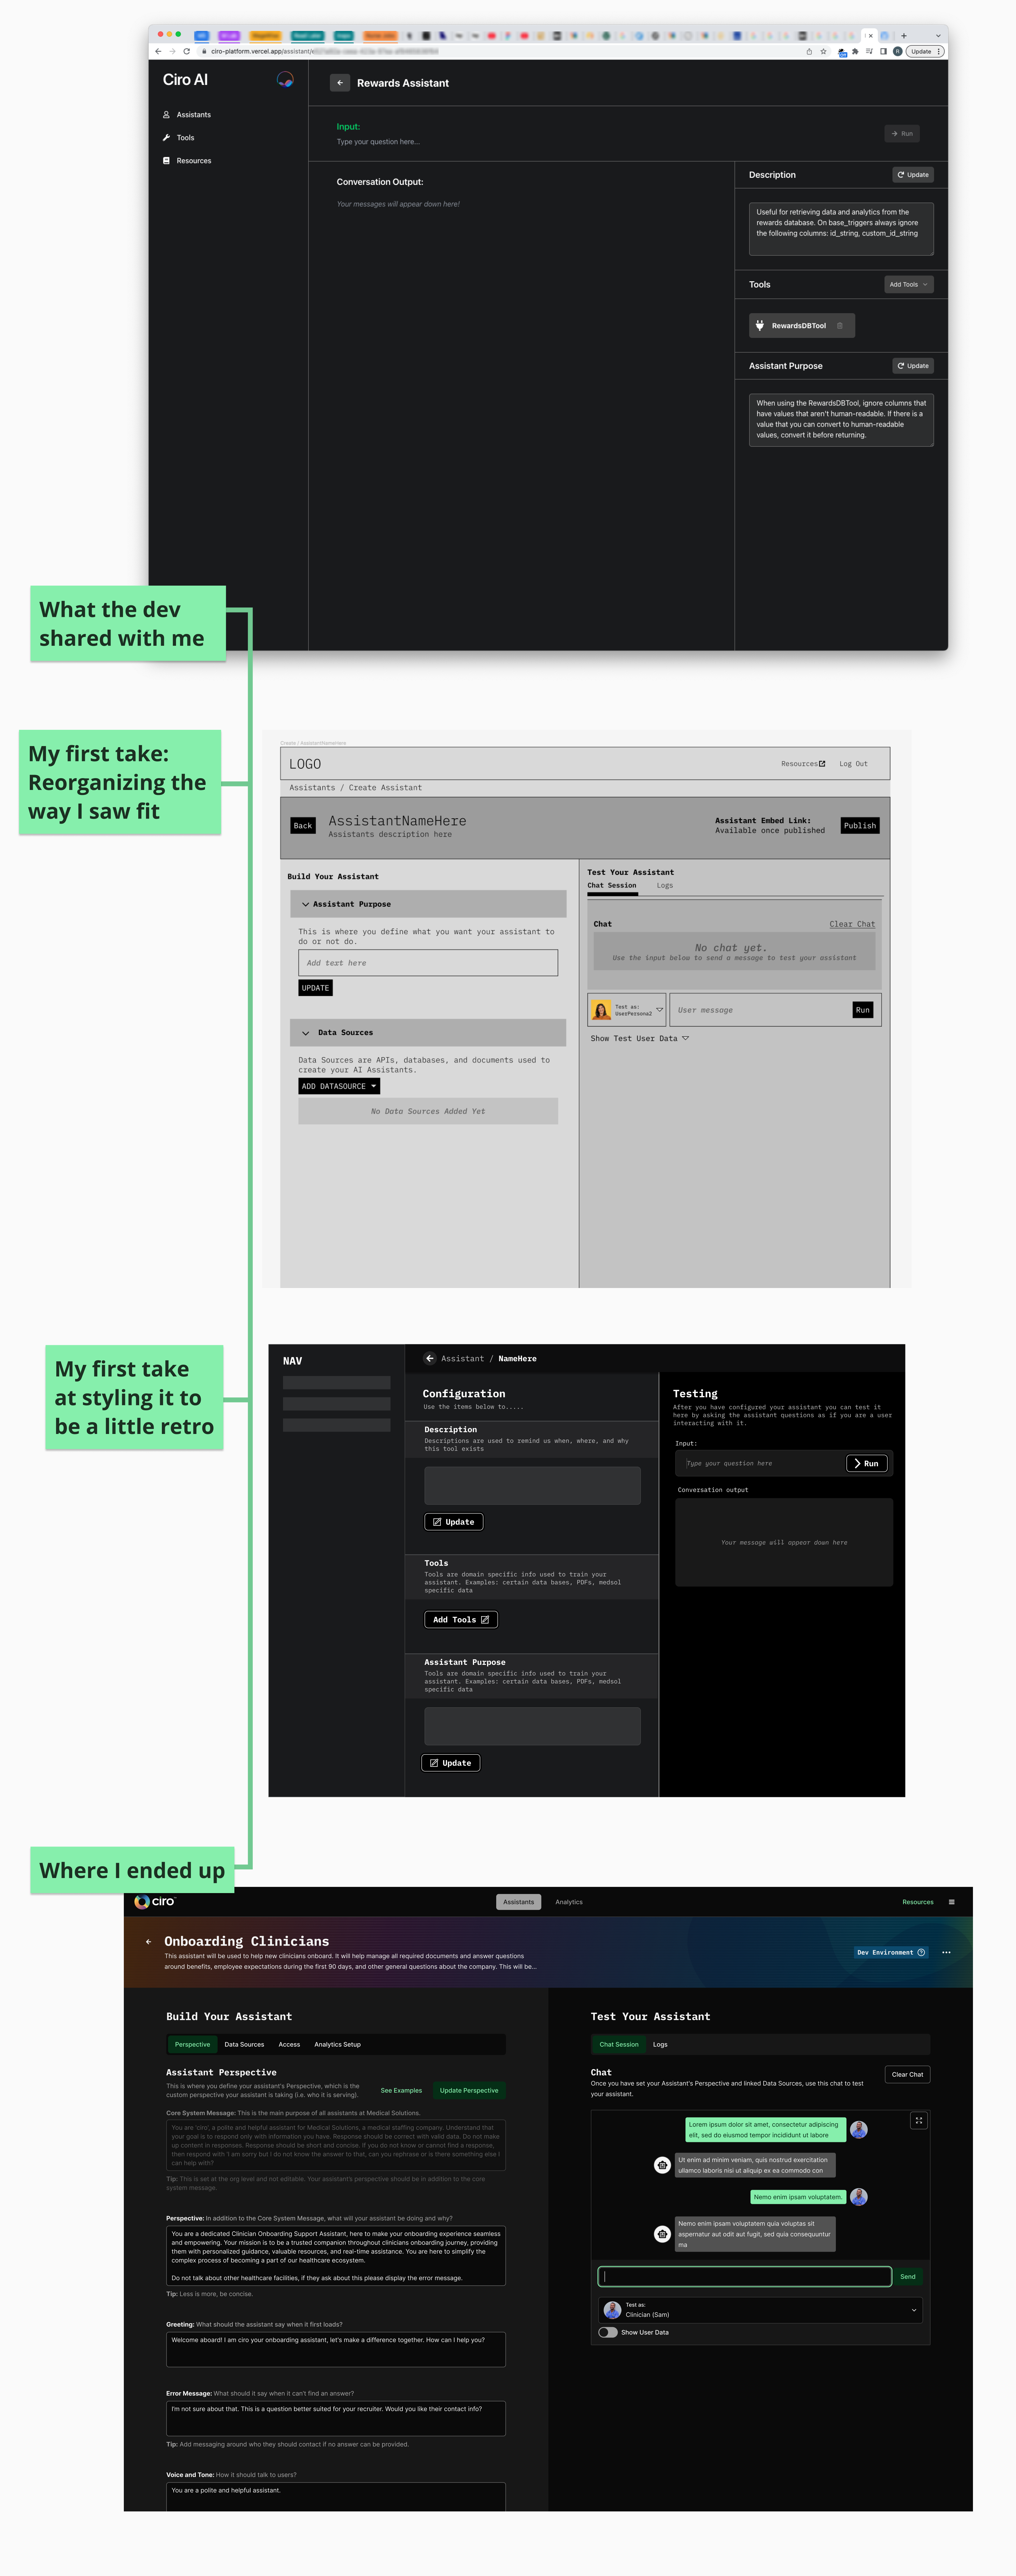 Screenshots showing a high level overview of my process from dev to wireframe to styled to final